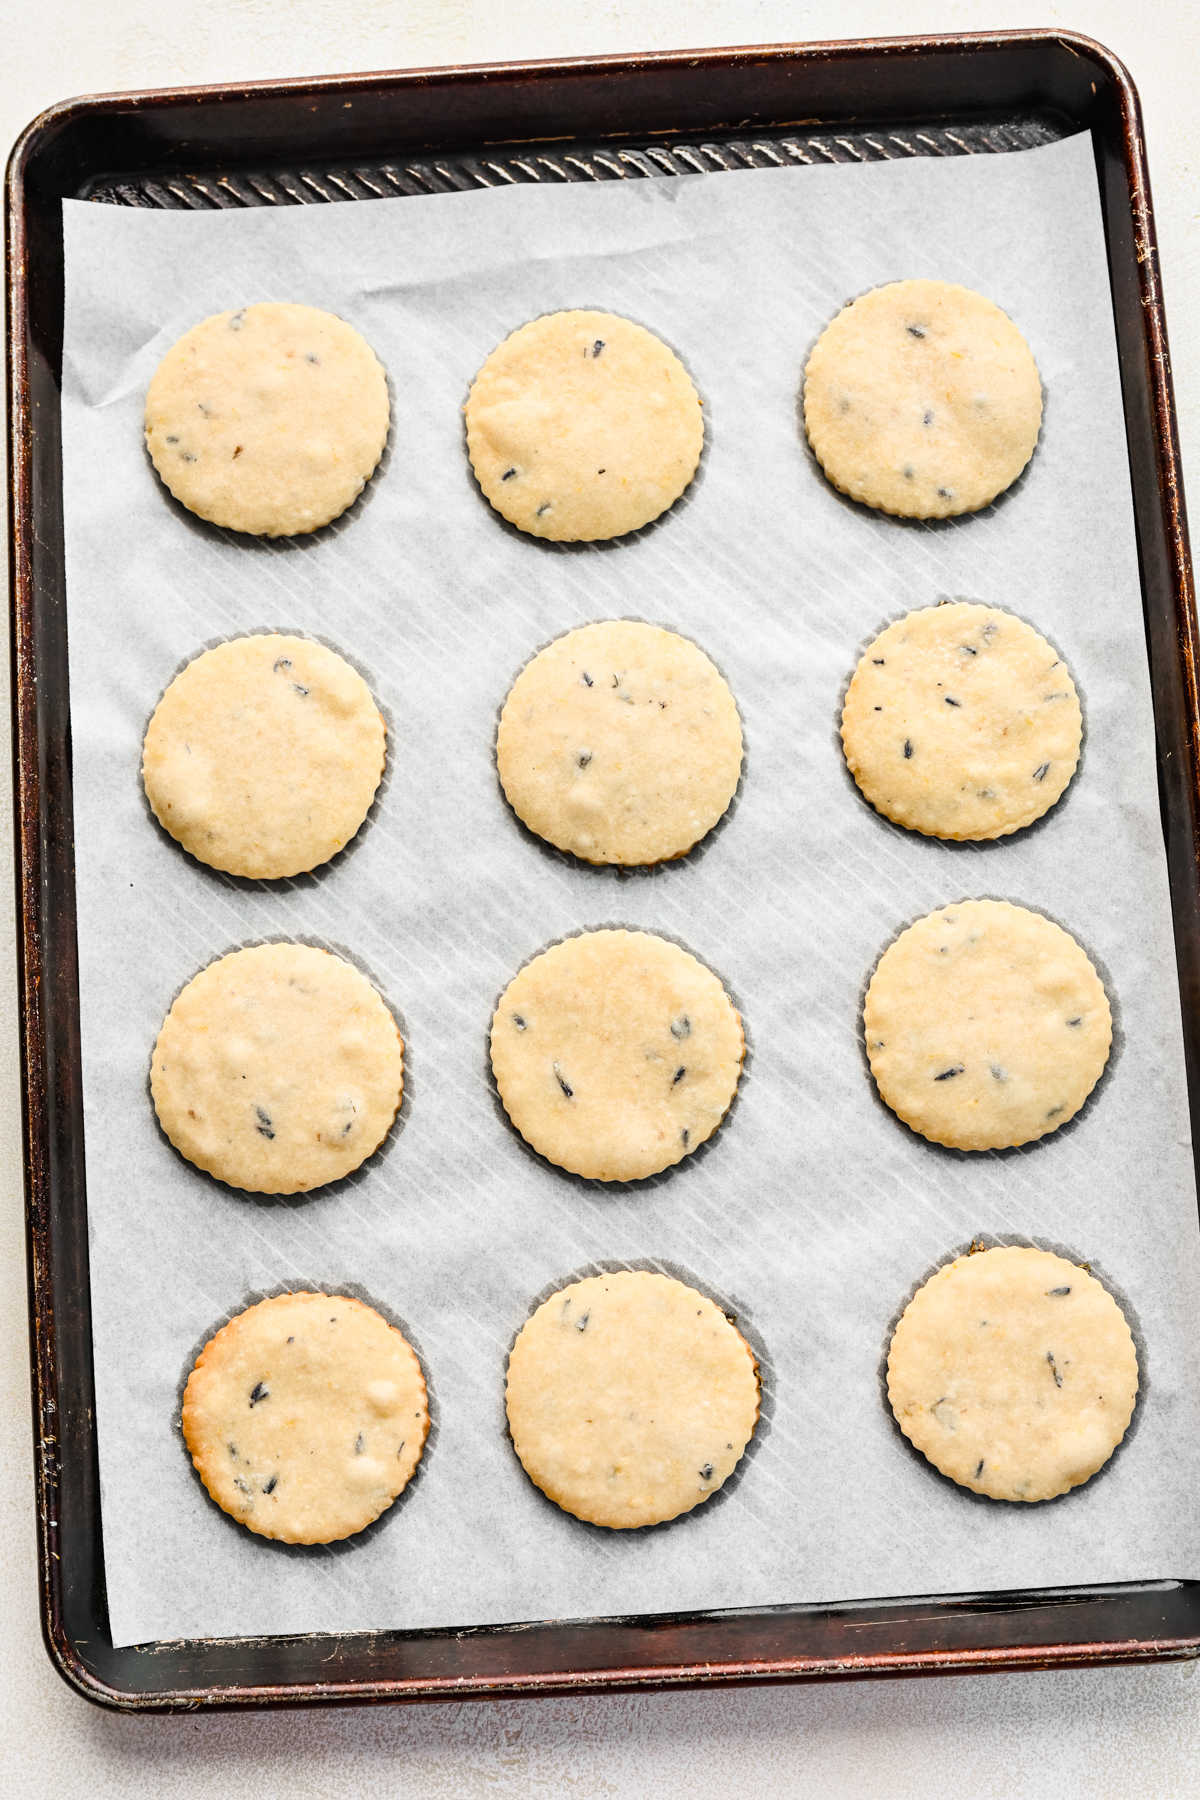 Baked lavender cookies on a parchment lined baking sheet.